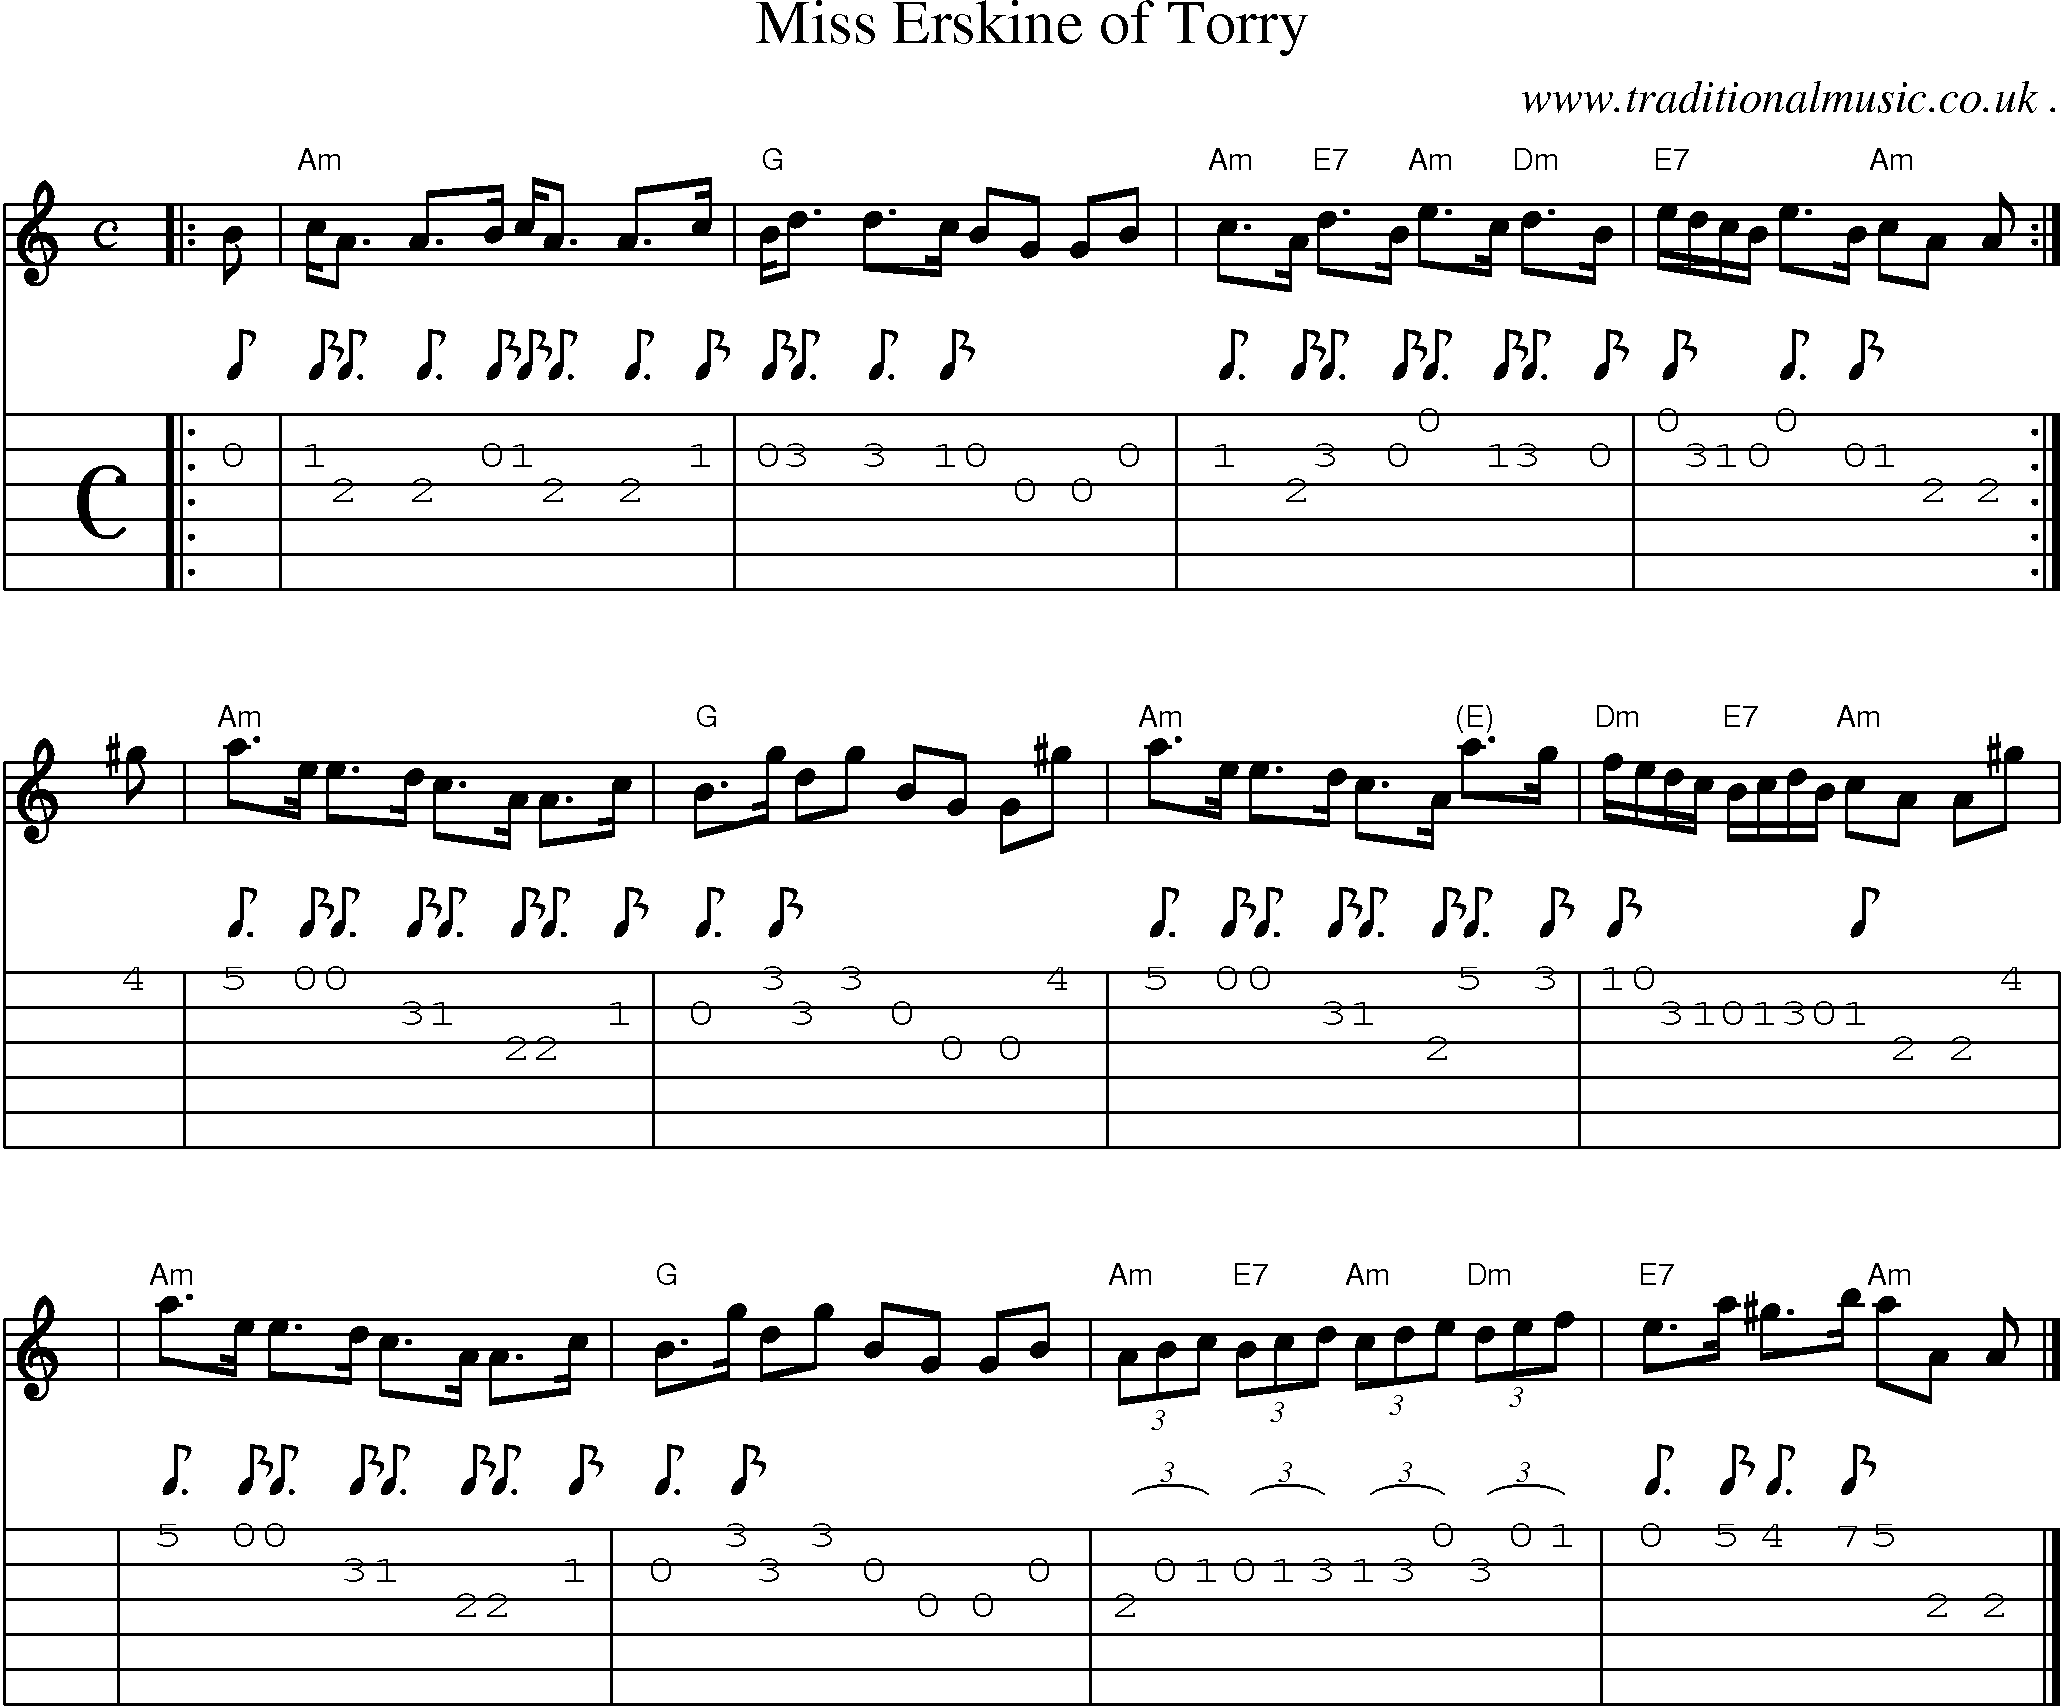 Sheet-music  score, Chords and Guitar Tabs for Miss Erskine Of Torry